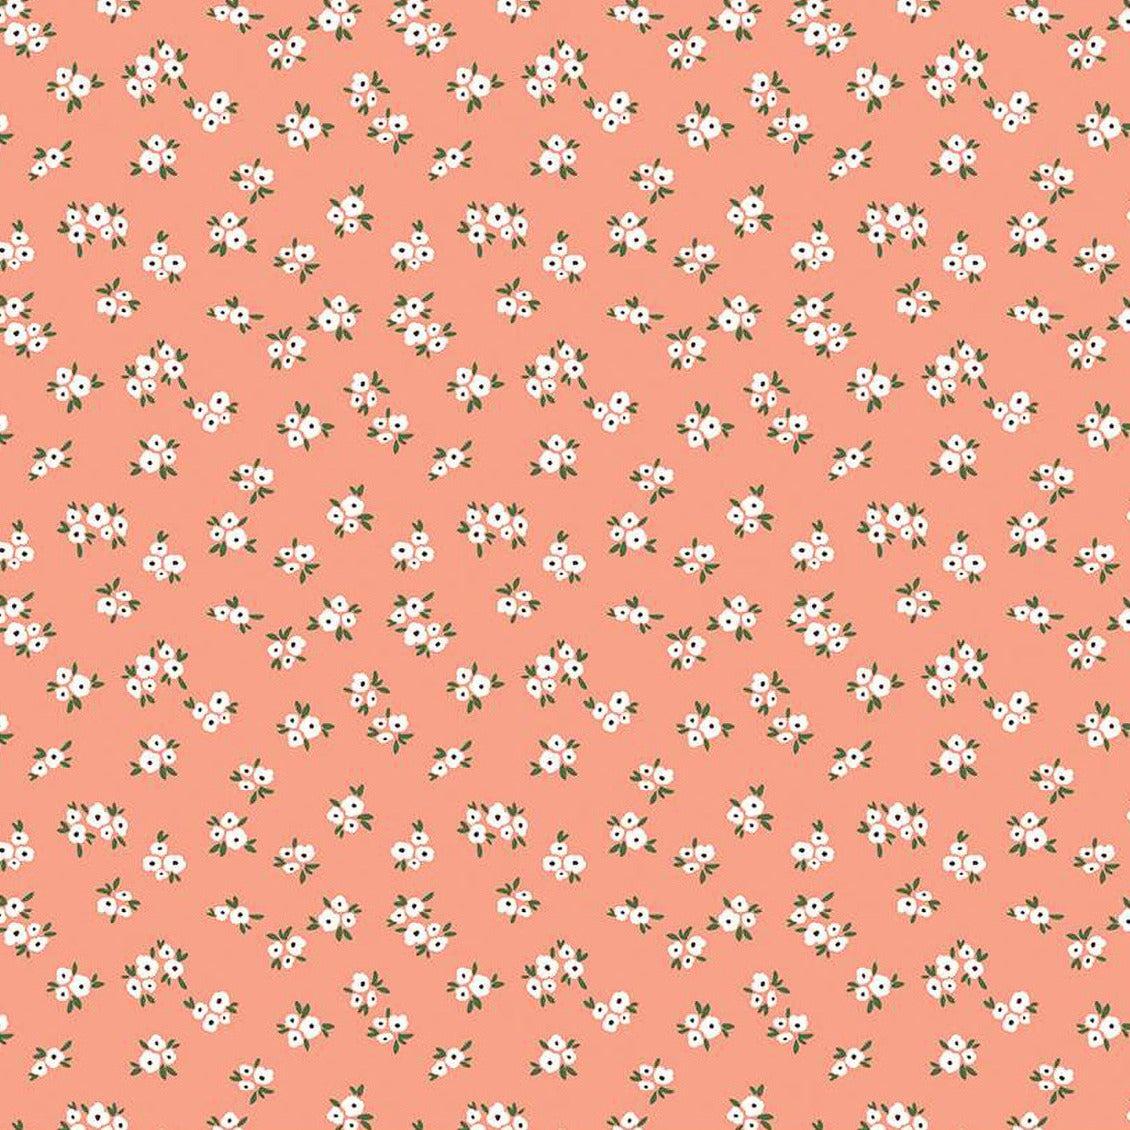 Homemade Coral Blossoms Fabric